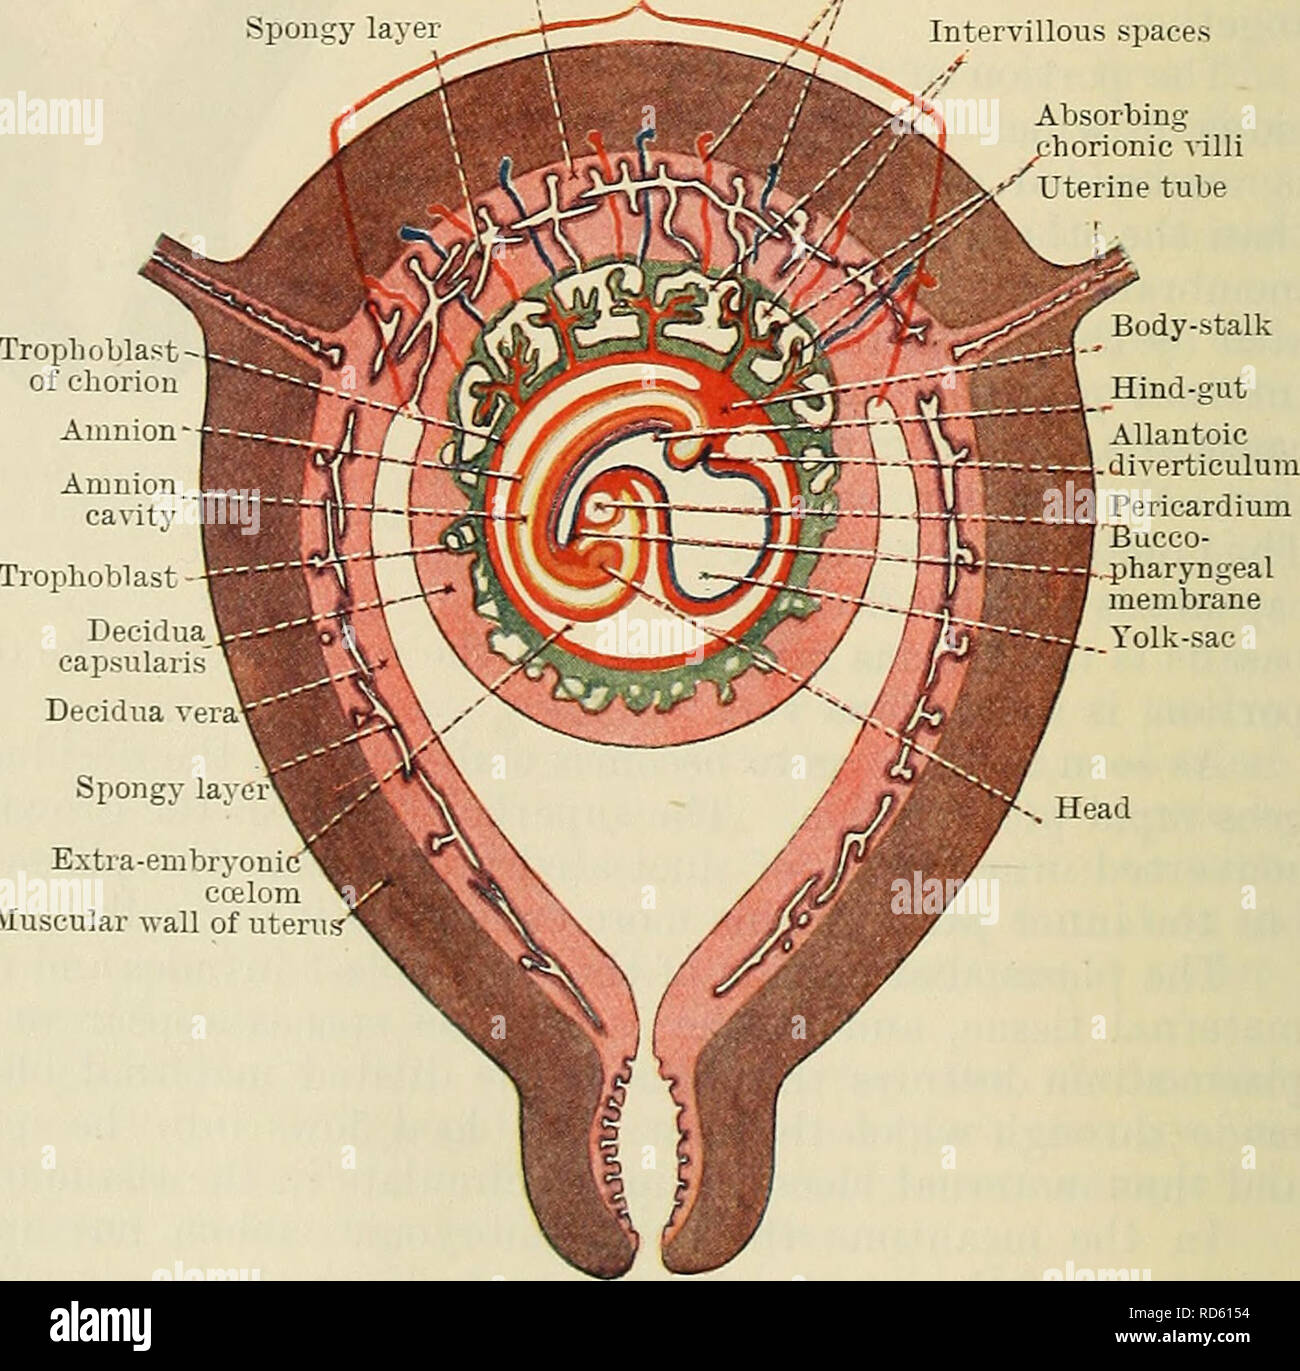 . Cunningham's Text-book of anatomy. Anatomy. ondary villus â Amnion cavity Amnion -Body-stalk Allantoic diverti- culum rimitive streak eurenteric canal Cavity of entoderm sac Extra-embryonic celom Decidua capsularis Decidua vera Embryonic are Fig. 75.âSchema of a Section of a Pregnant Uterus after the formation of the Intervillous Spaces. parts. (1) The parts which lie between adjacent blood spaces, the primary chorionic villi. (2) The parts which lie in con- tact with the mesoderm of the chorion, and which form with the mesoderm the chorion plate. (3) The parts which cover the maternal tissu Stock Photo